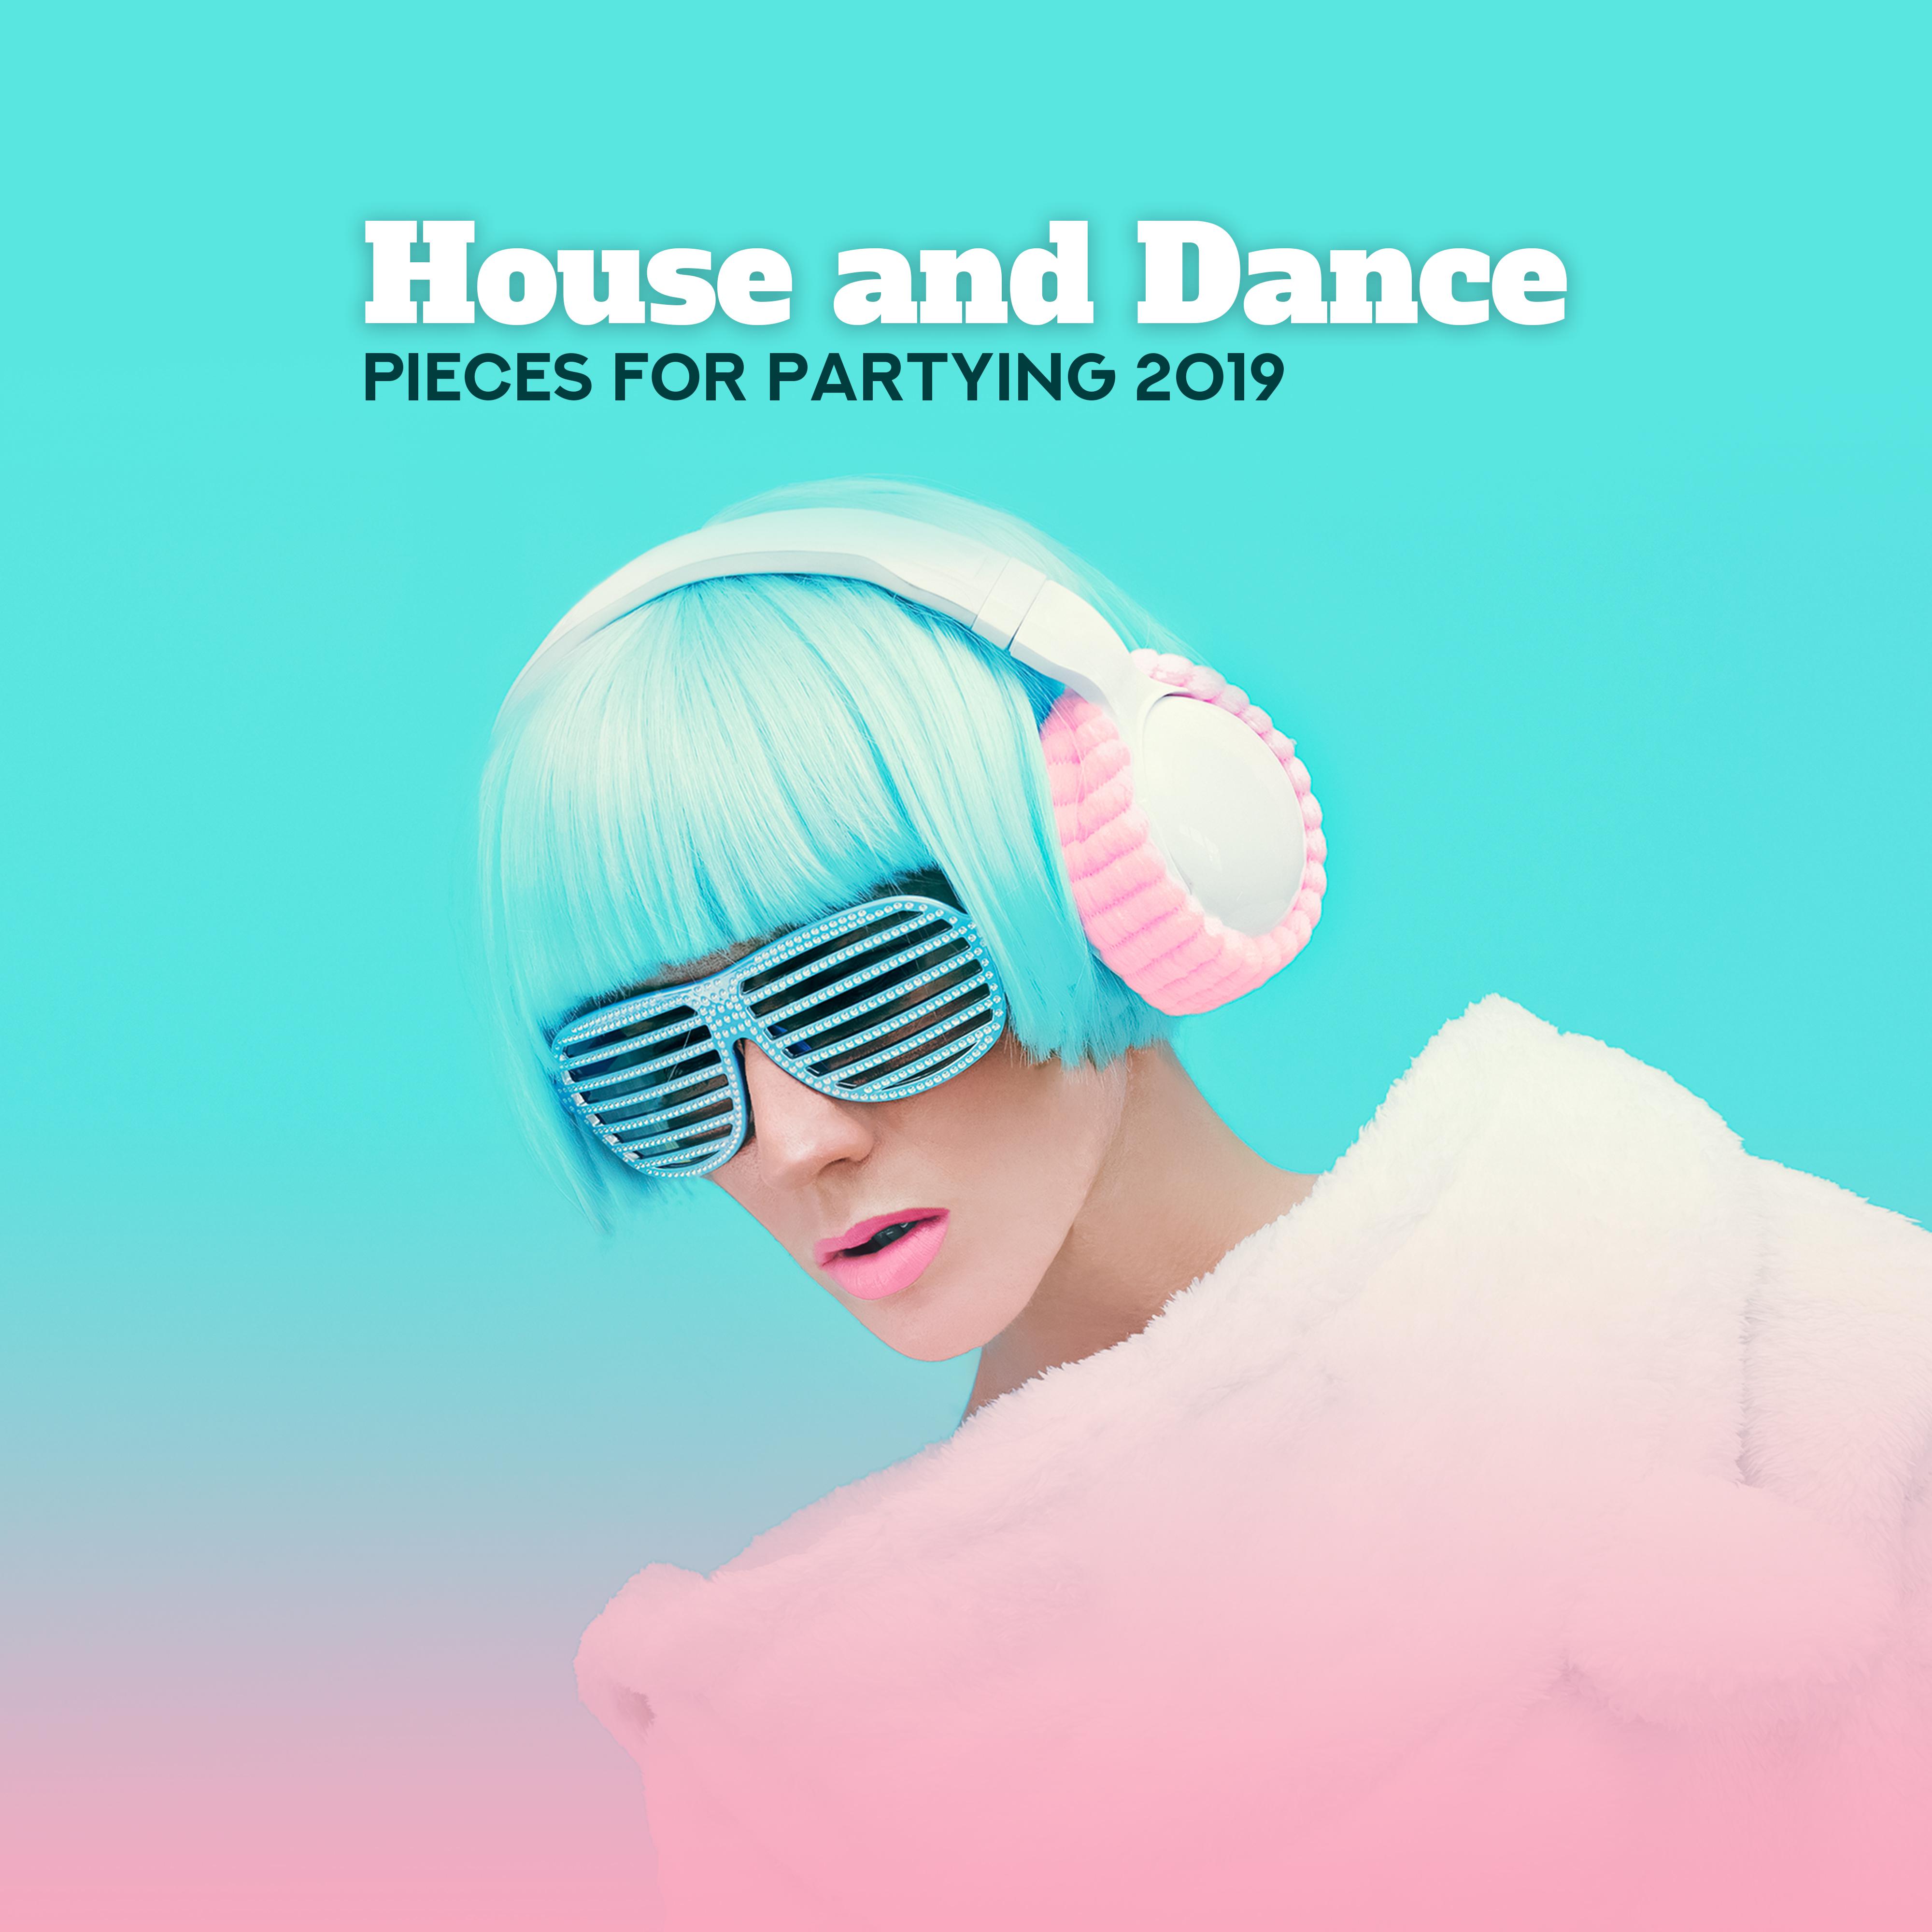 House and Dance Pieces for Partying 2019